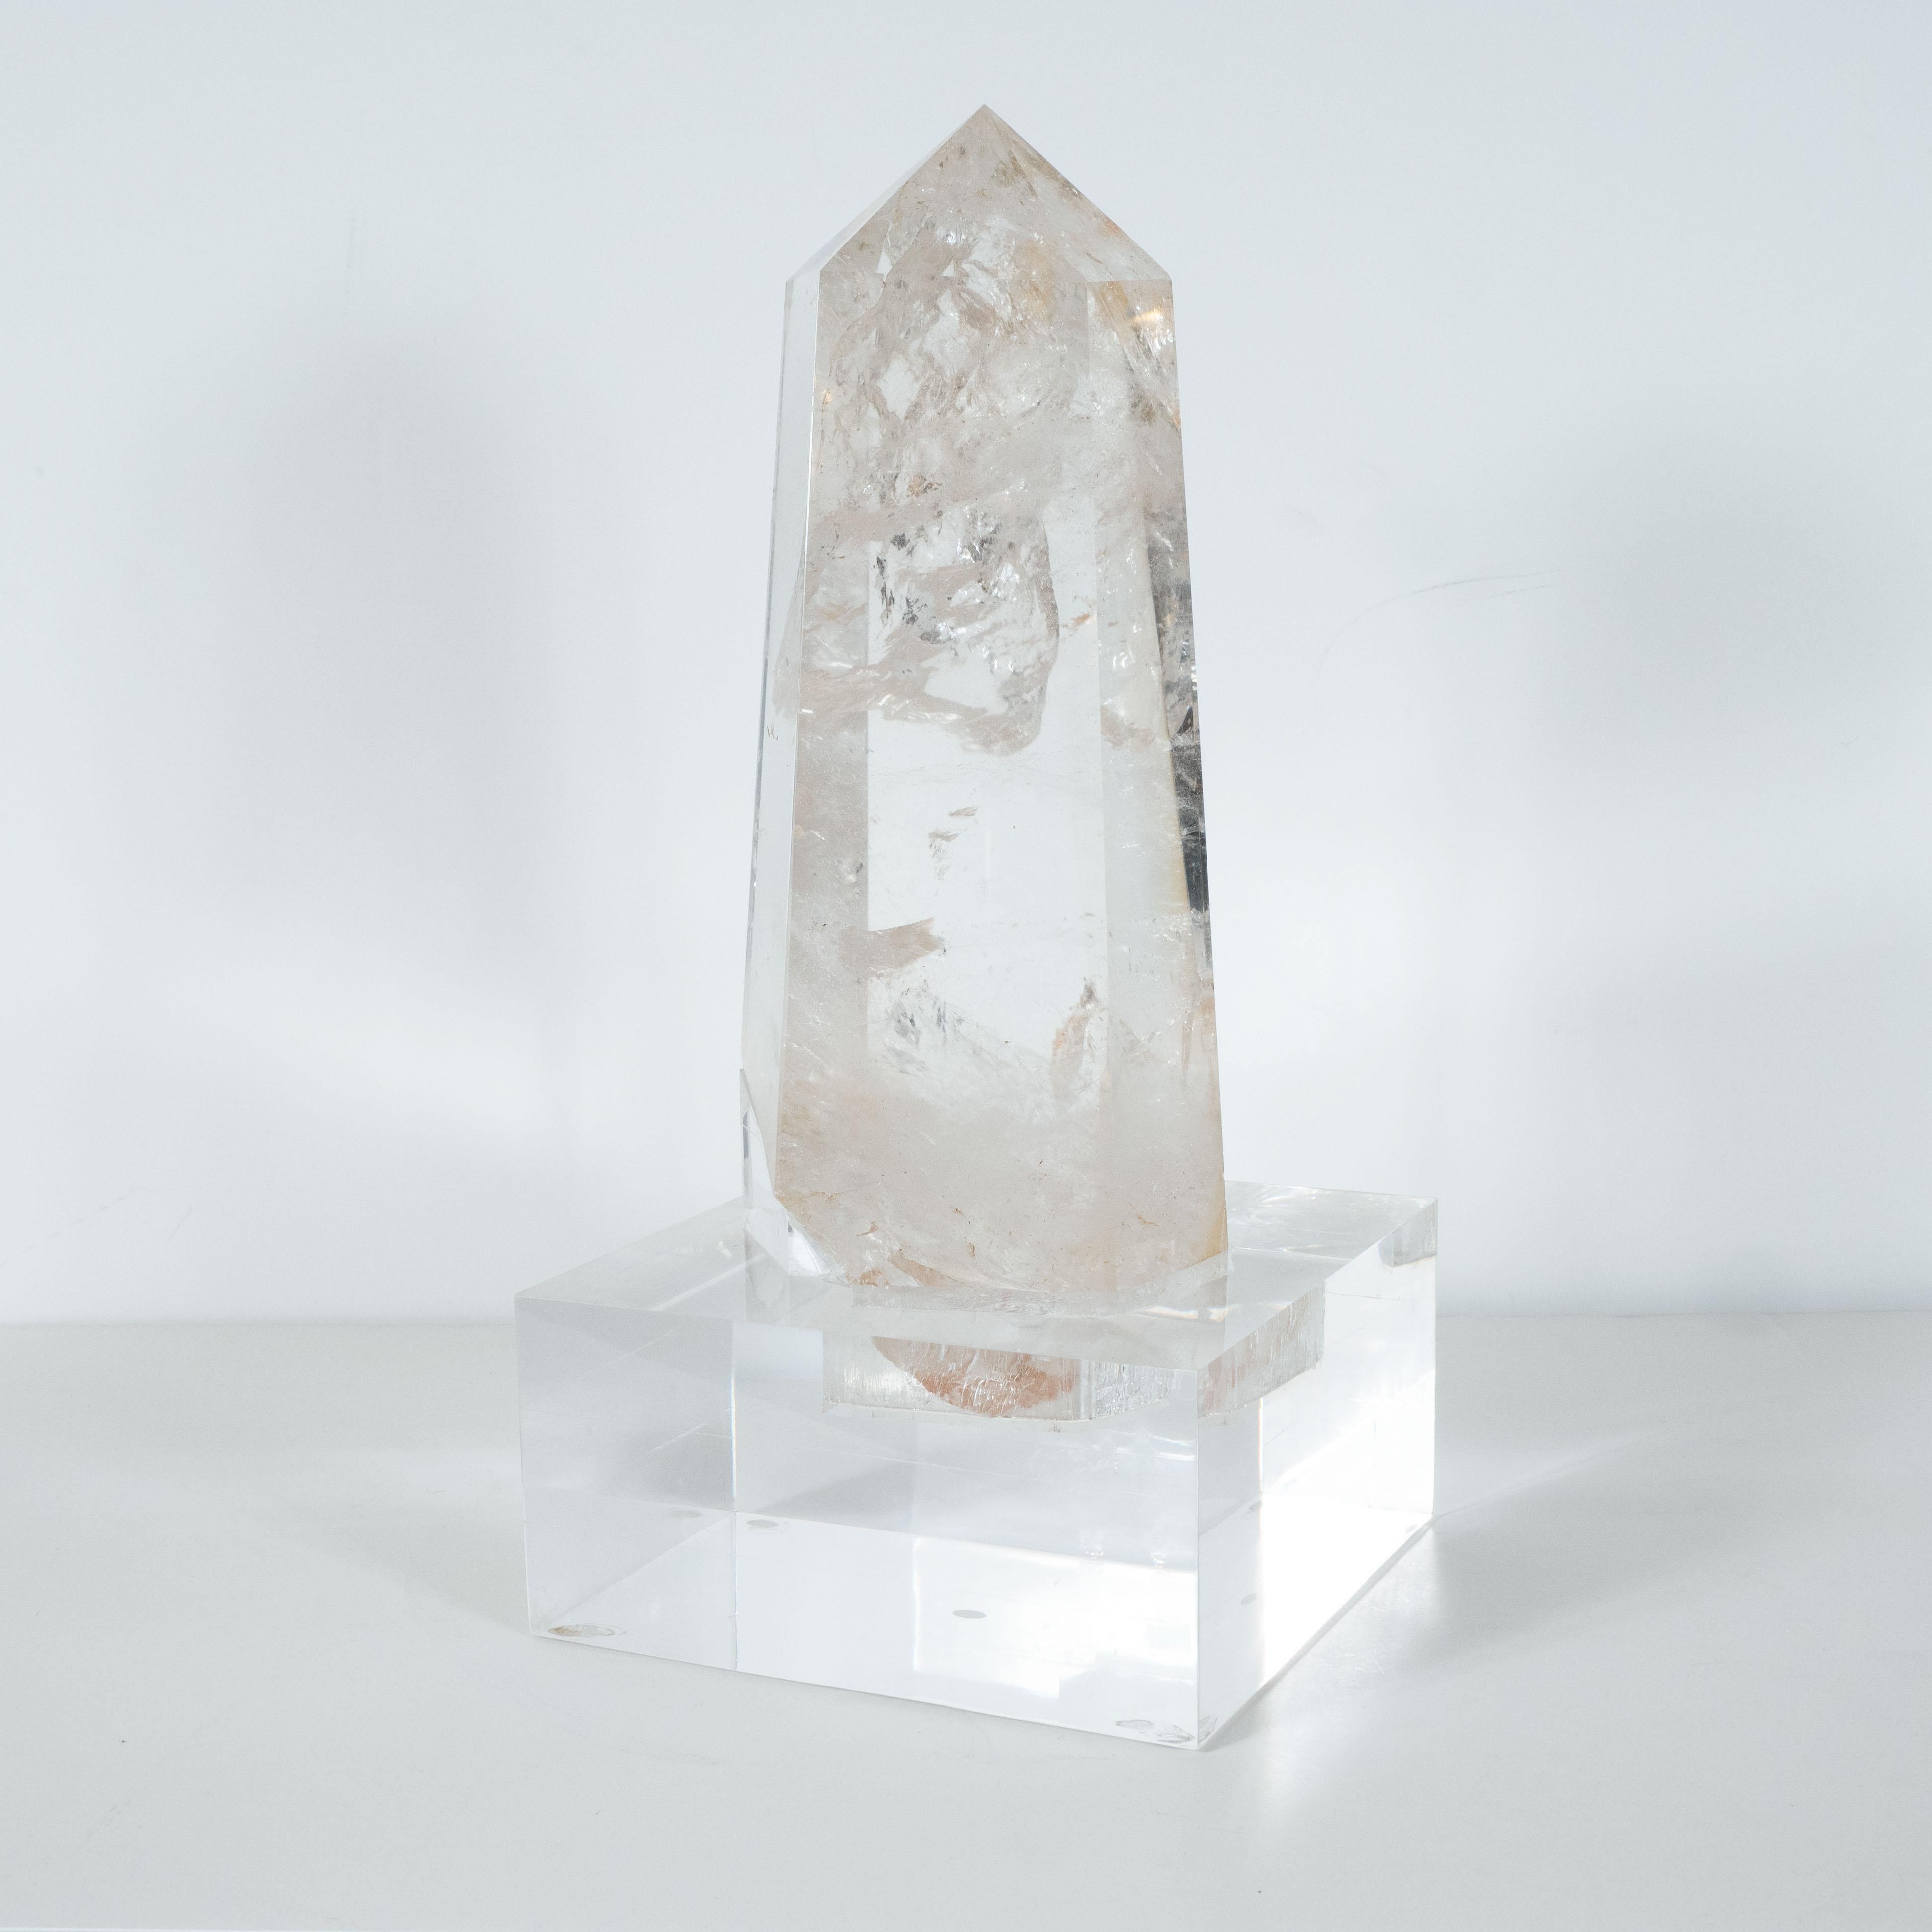 This elegant modernist rock crystal obelisk was produced in Brazil, where many of the finest specimens of this kind are sourced. It features a faceted body with a wealth of organic textures apparent in its interior. The specimen rests in a custom